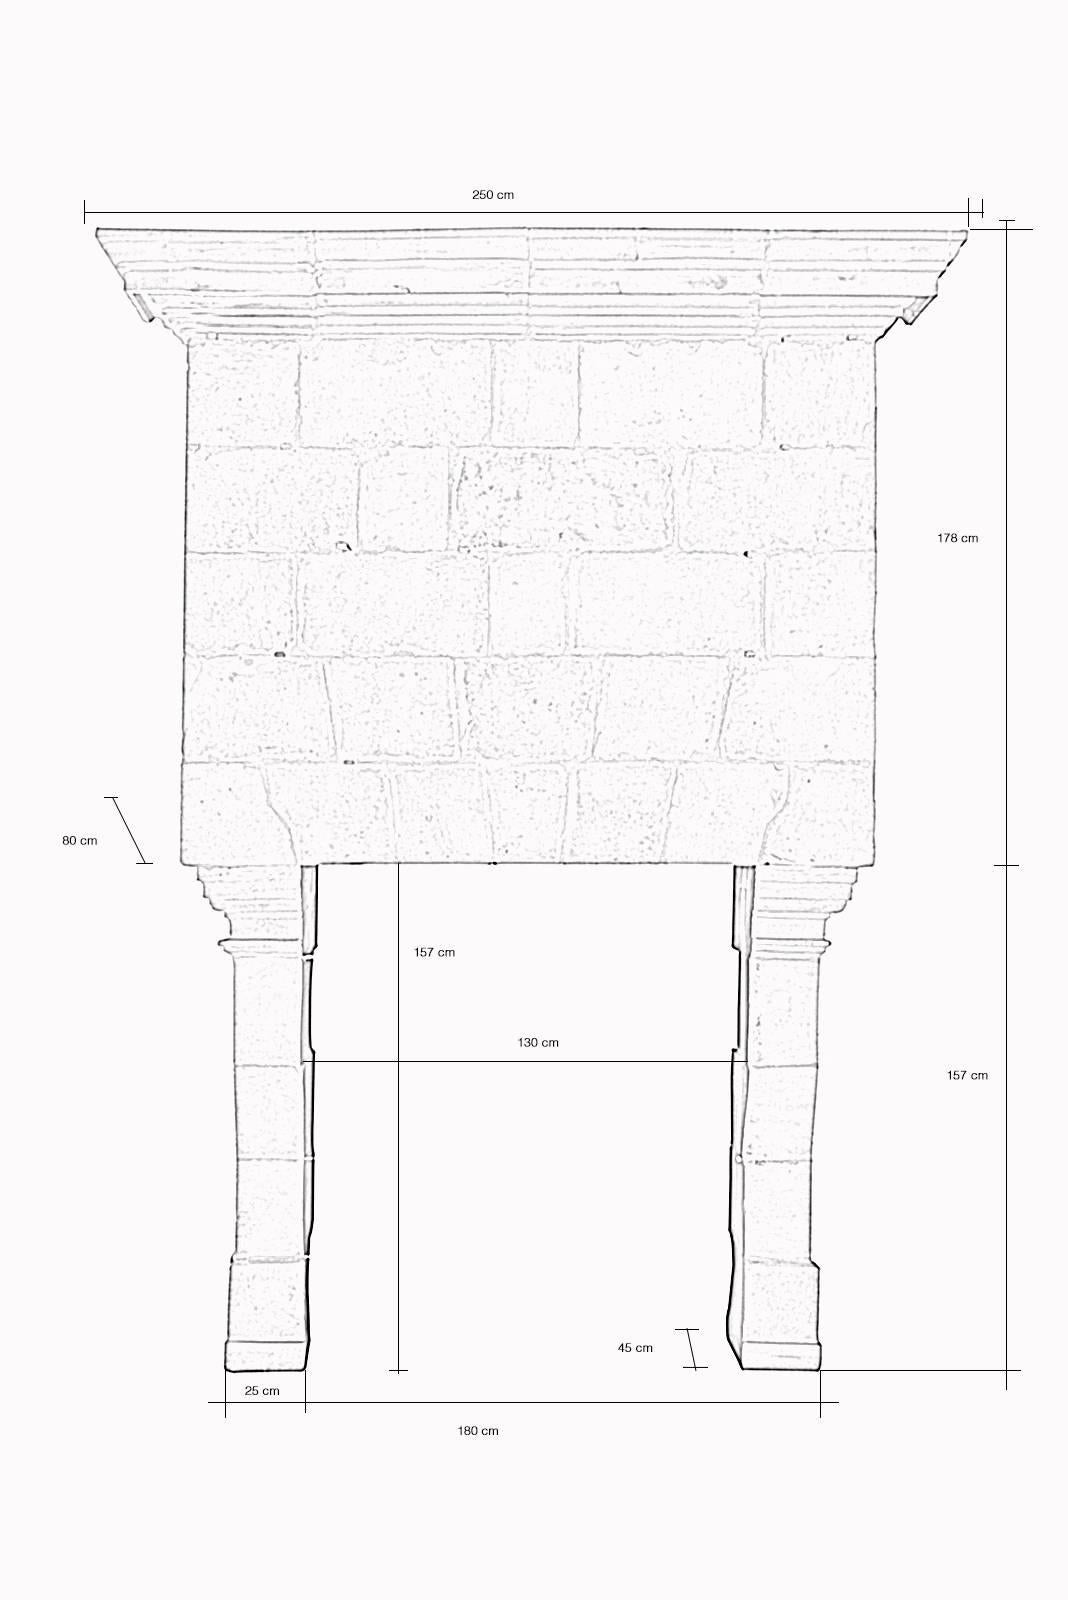 Dated from the early 17th century, a Louis XIII period stone fireplace with overmantel piece. This one rests on slightly curved legs via molded console corbels. It is originating from La Pinotière, an old castle dated from 1619 located on the Duchy